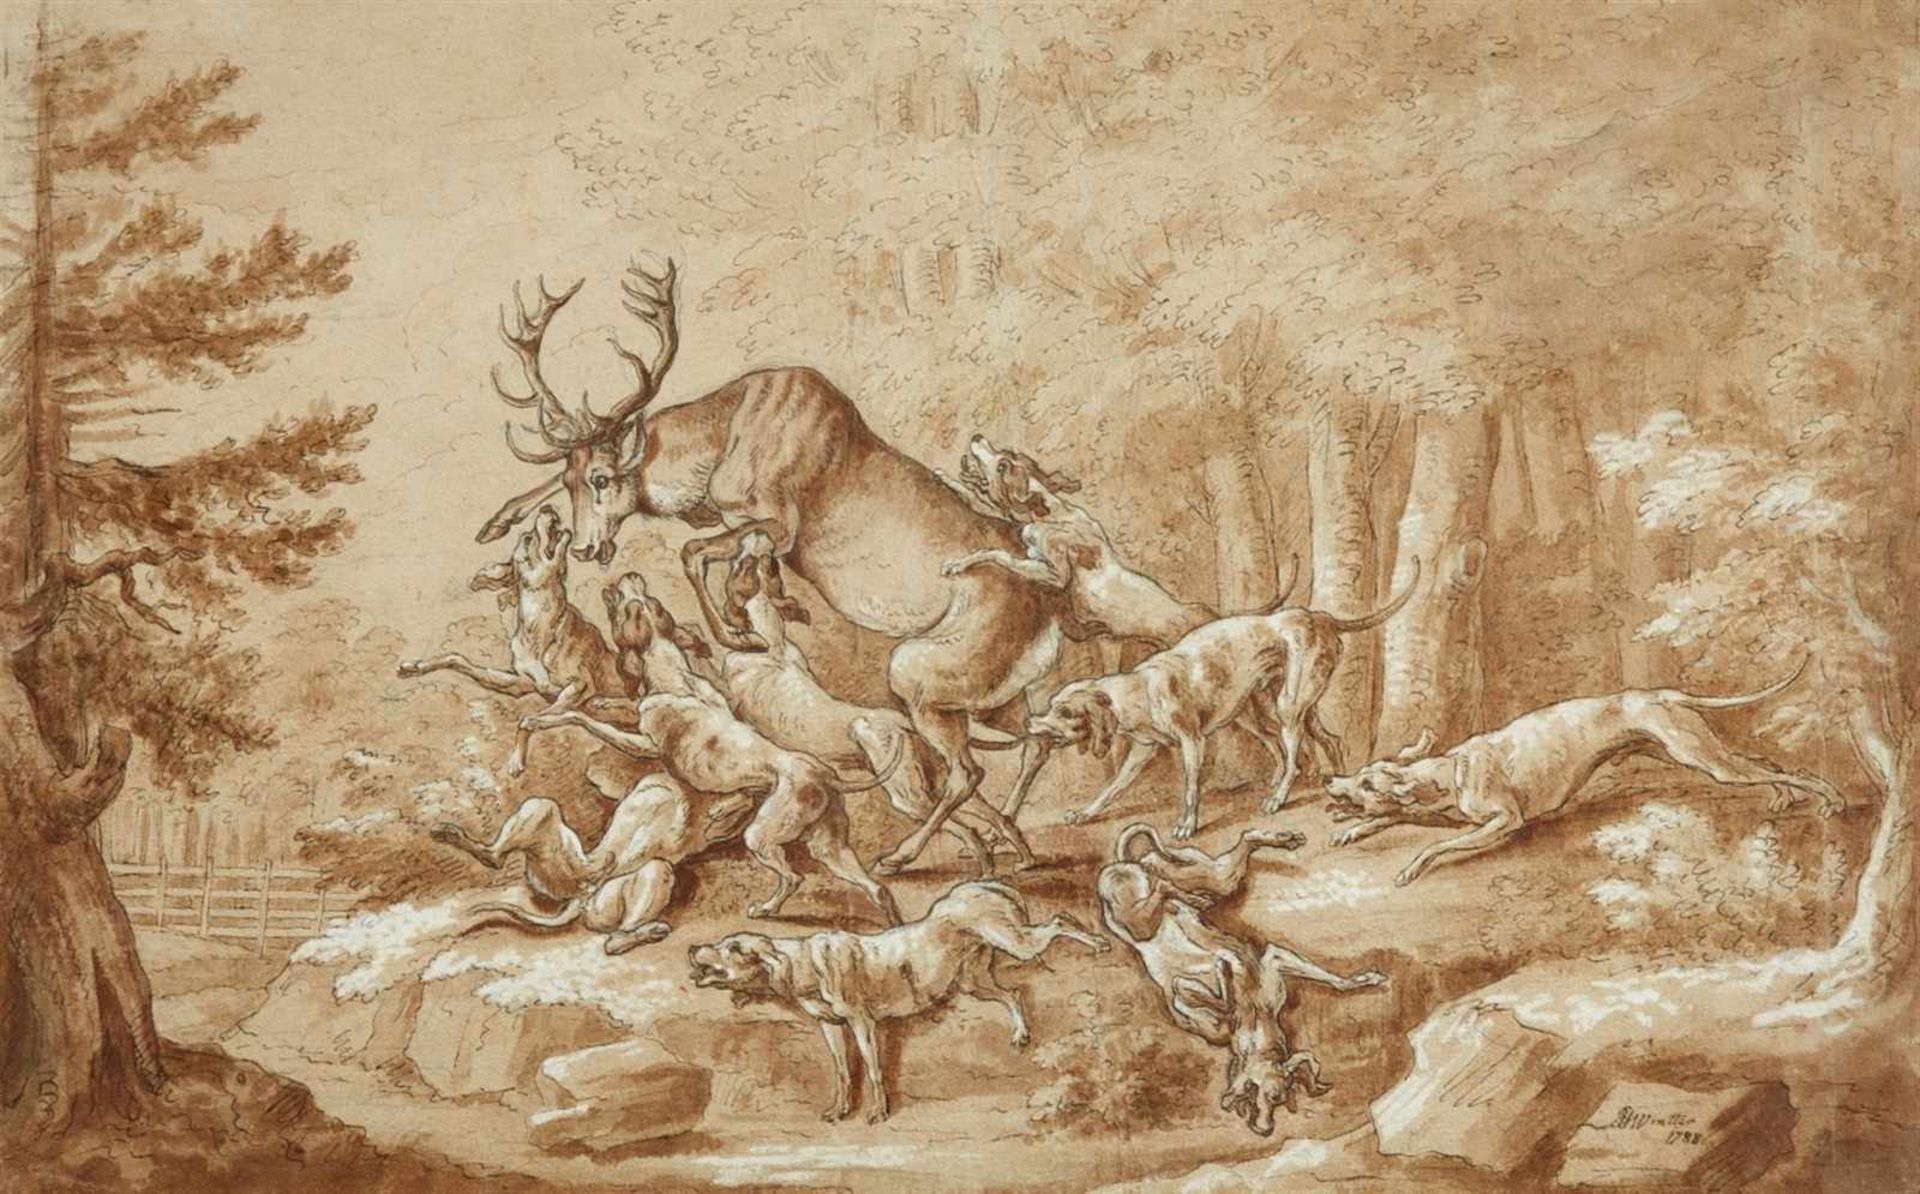 Joseph Georg WinterDeer HuntBrown ink and wash, highlighted in white. 39.5 x 61 cm.Signed and